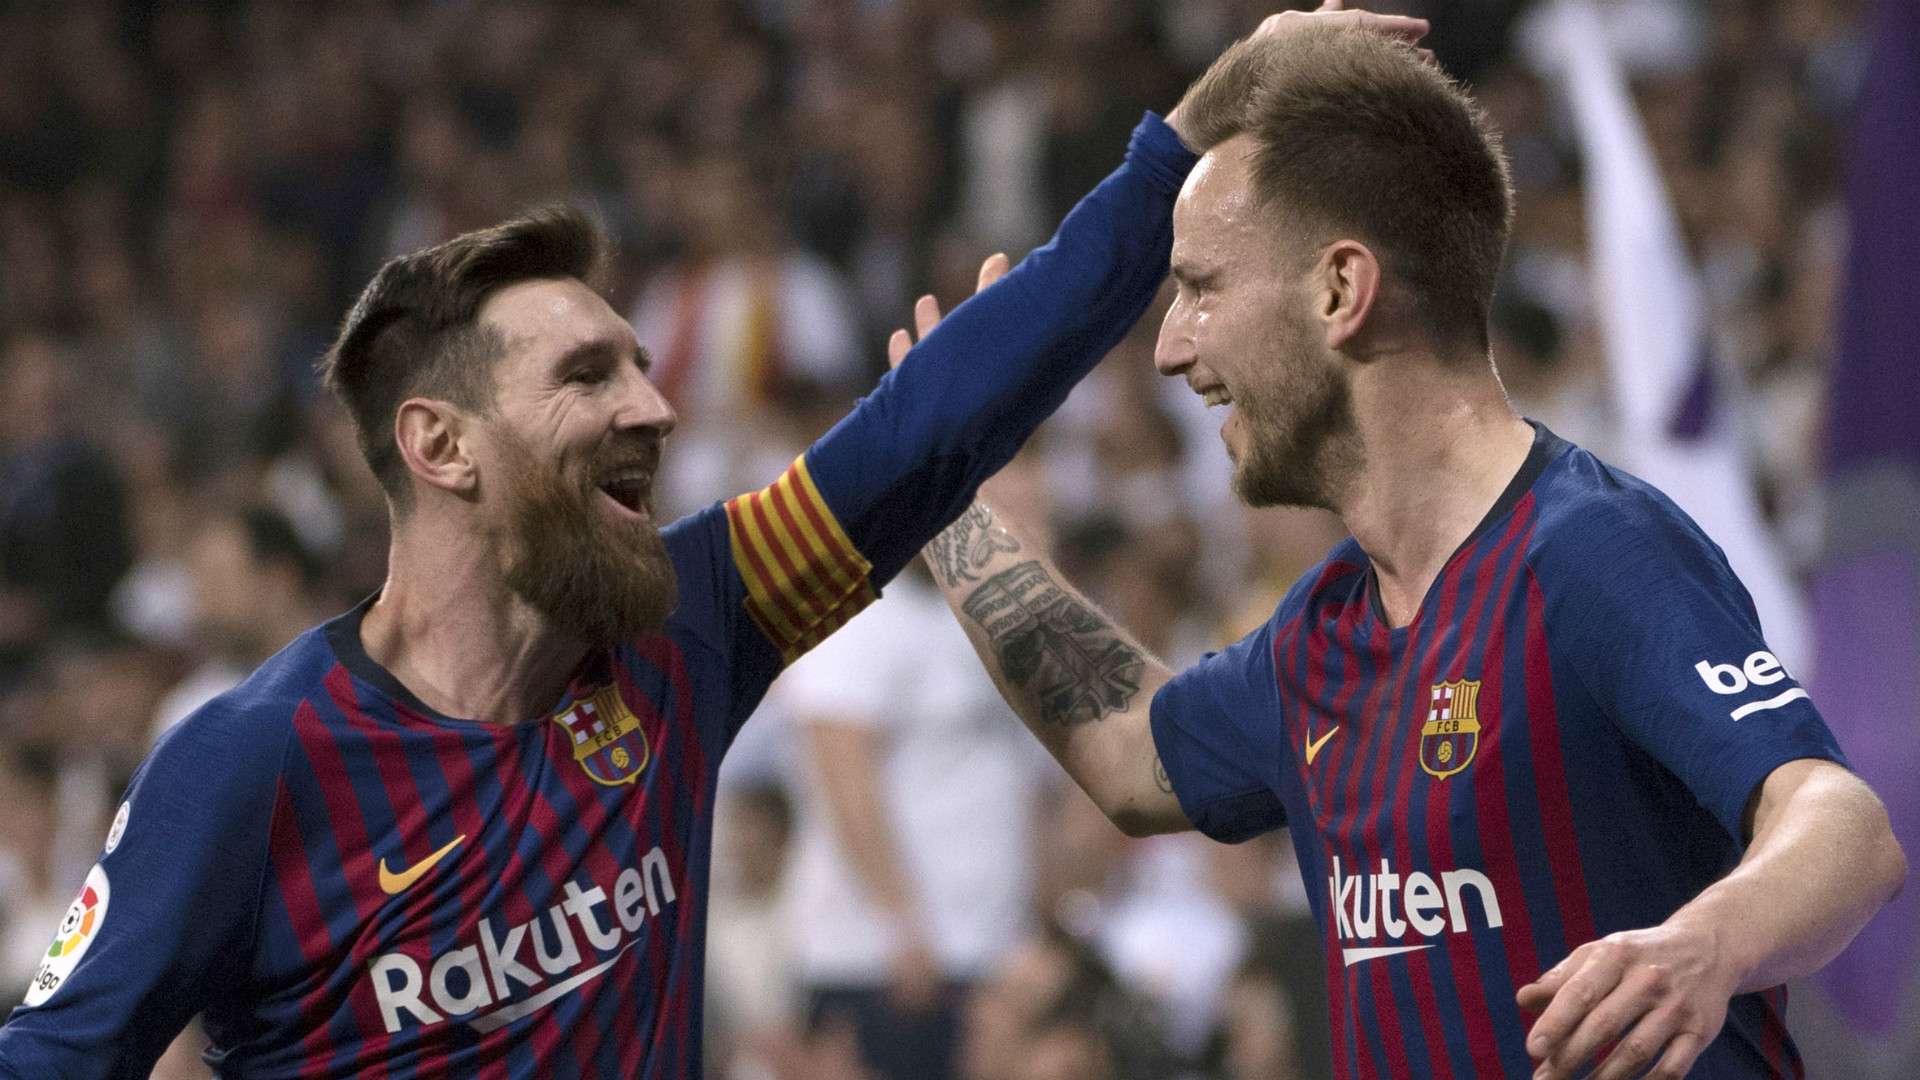 I have a trophy you'll never have' - Rakitic on joking with Messi about cup  'he won't win' | Goal.com India